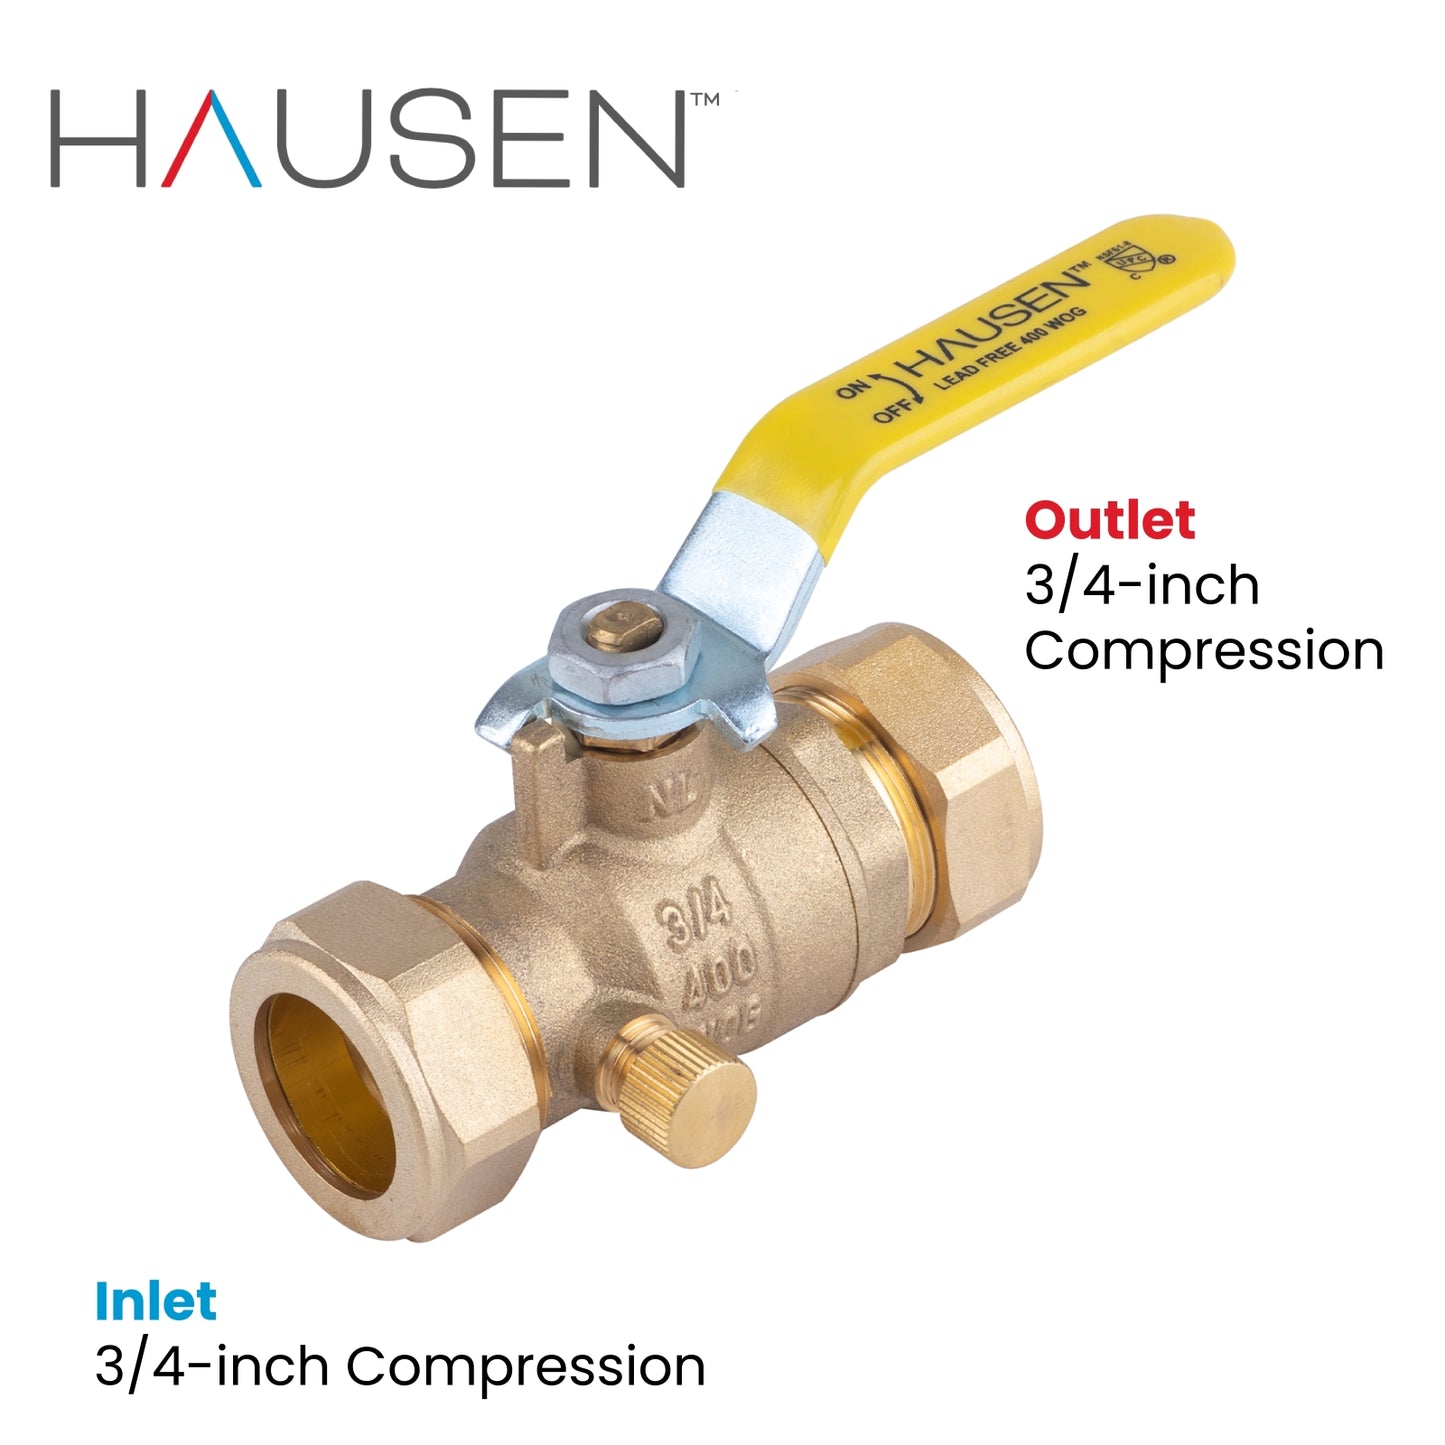 Hausen 3/4-inch Compression Standard Port Brass Ball Valve with Drain, 1-Pack